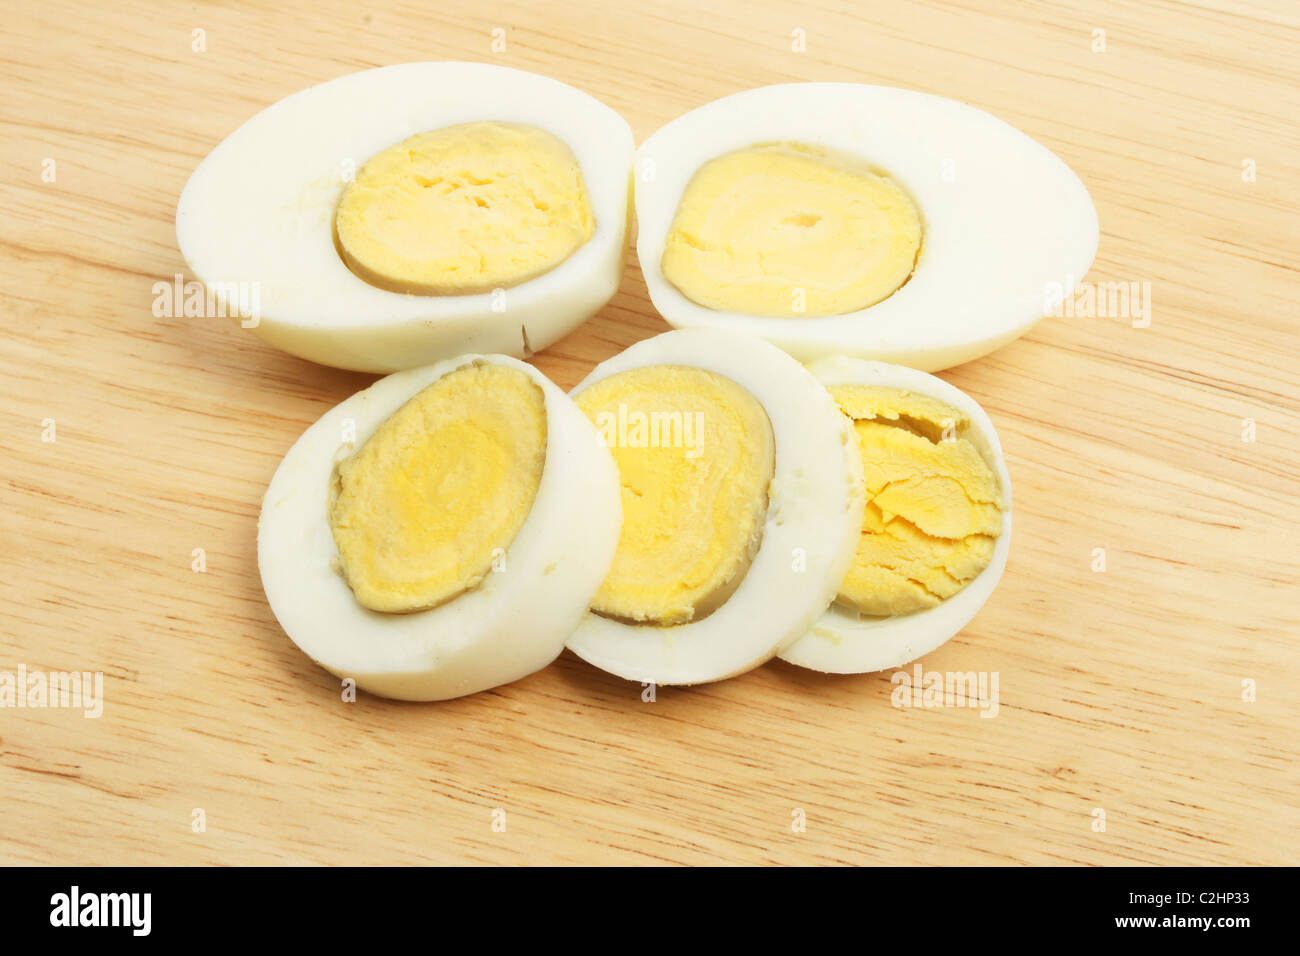 Sliced hard boiled eggs on a wooden board Stock Photo